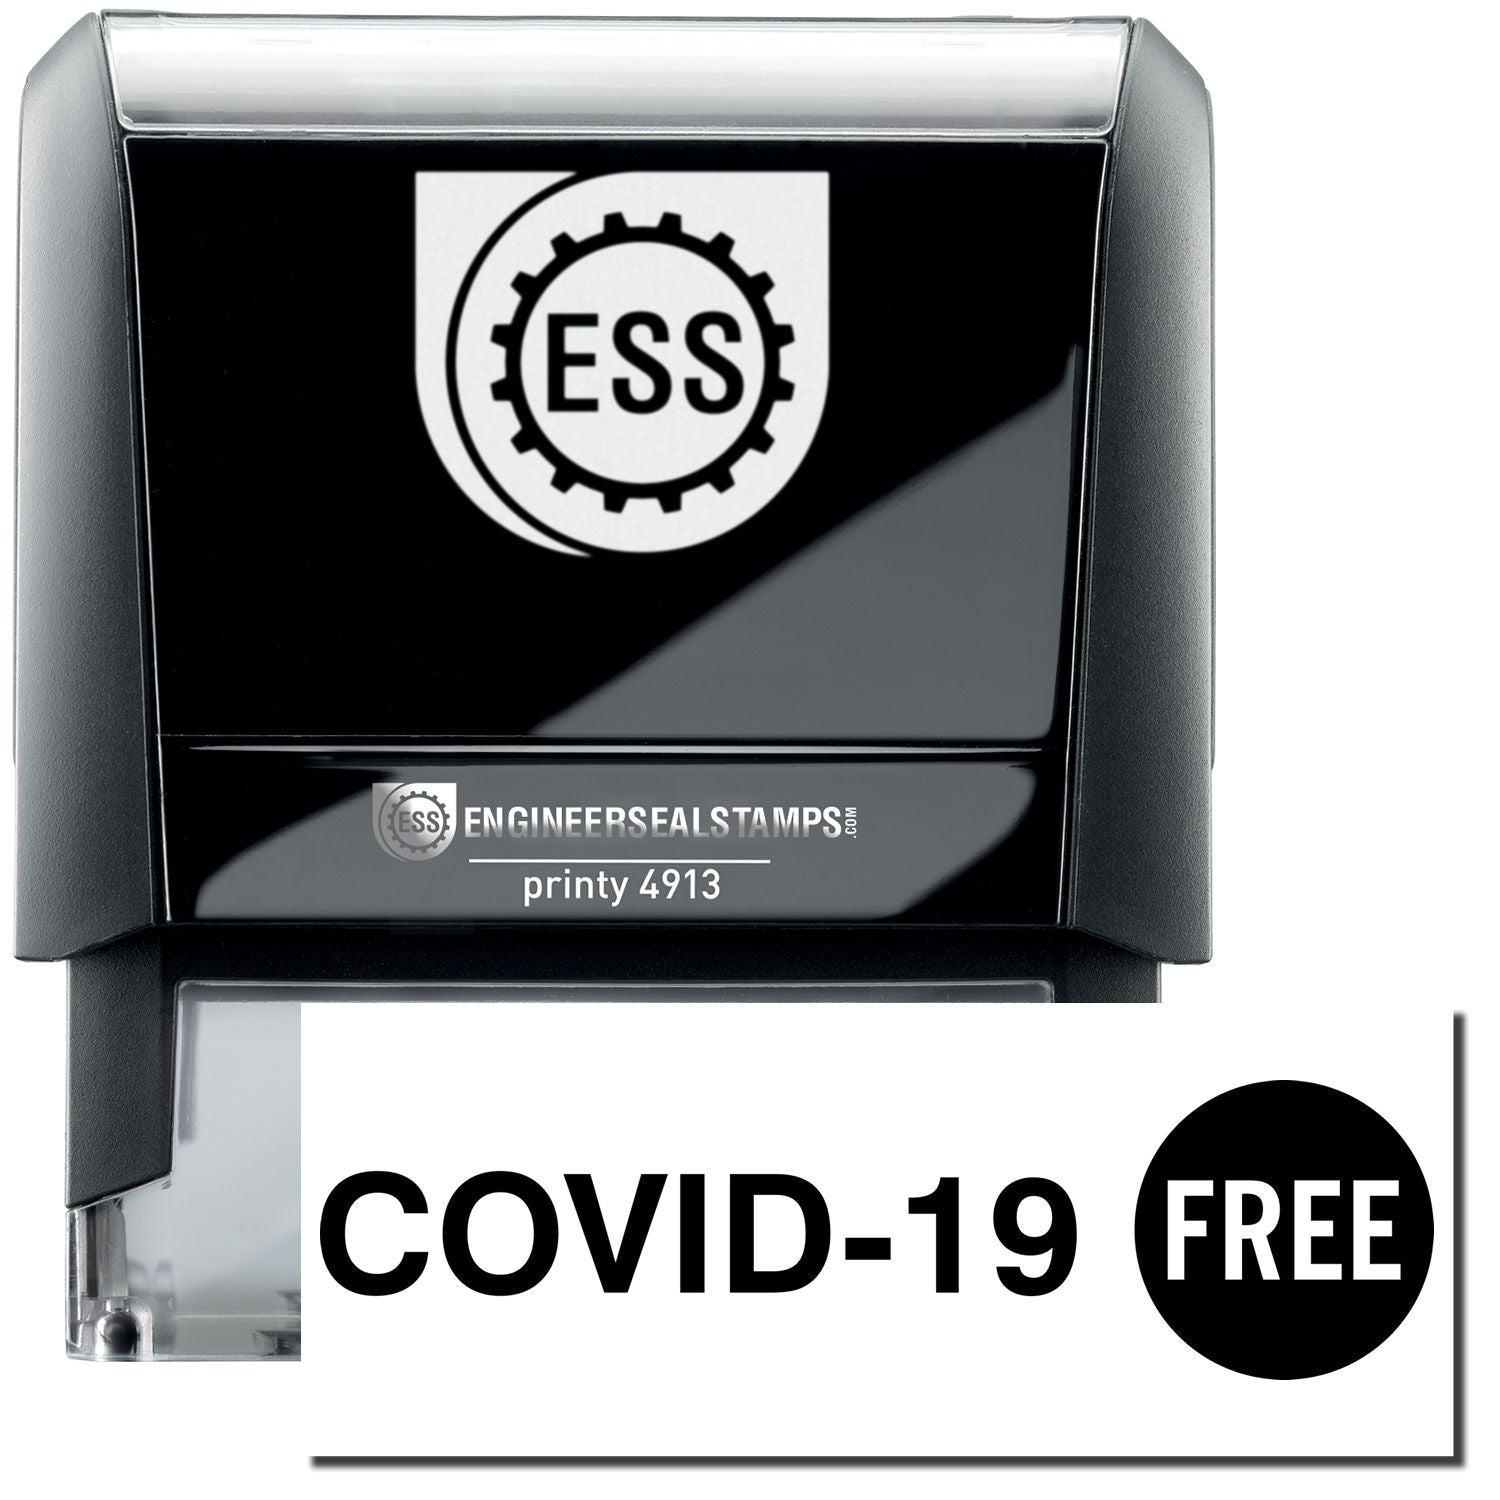 A self-inking stamp with a stamped image showing how the text "COVID-19 FREE" (in which the word "FREE" is shown inside a circle) in a large font is displayed by it after stamping.